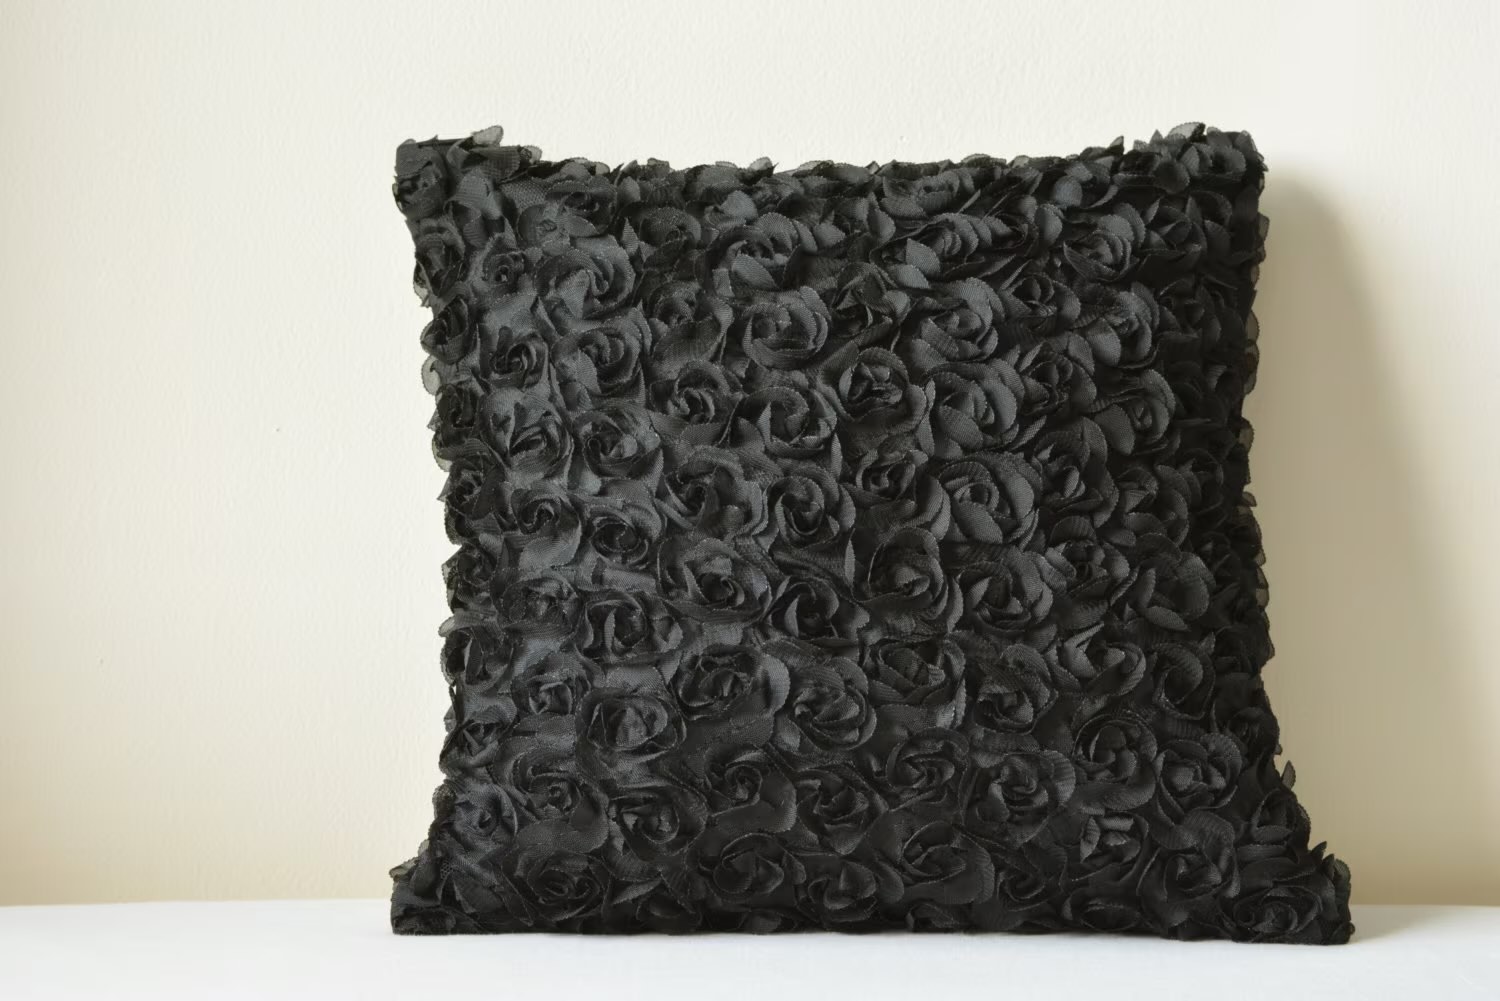 Enhancing Your Home Decor With DIY Rosette Cluster Pillows